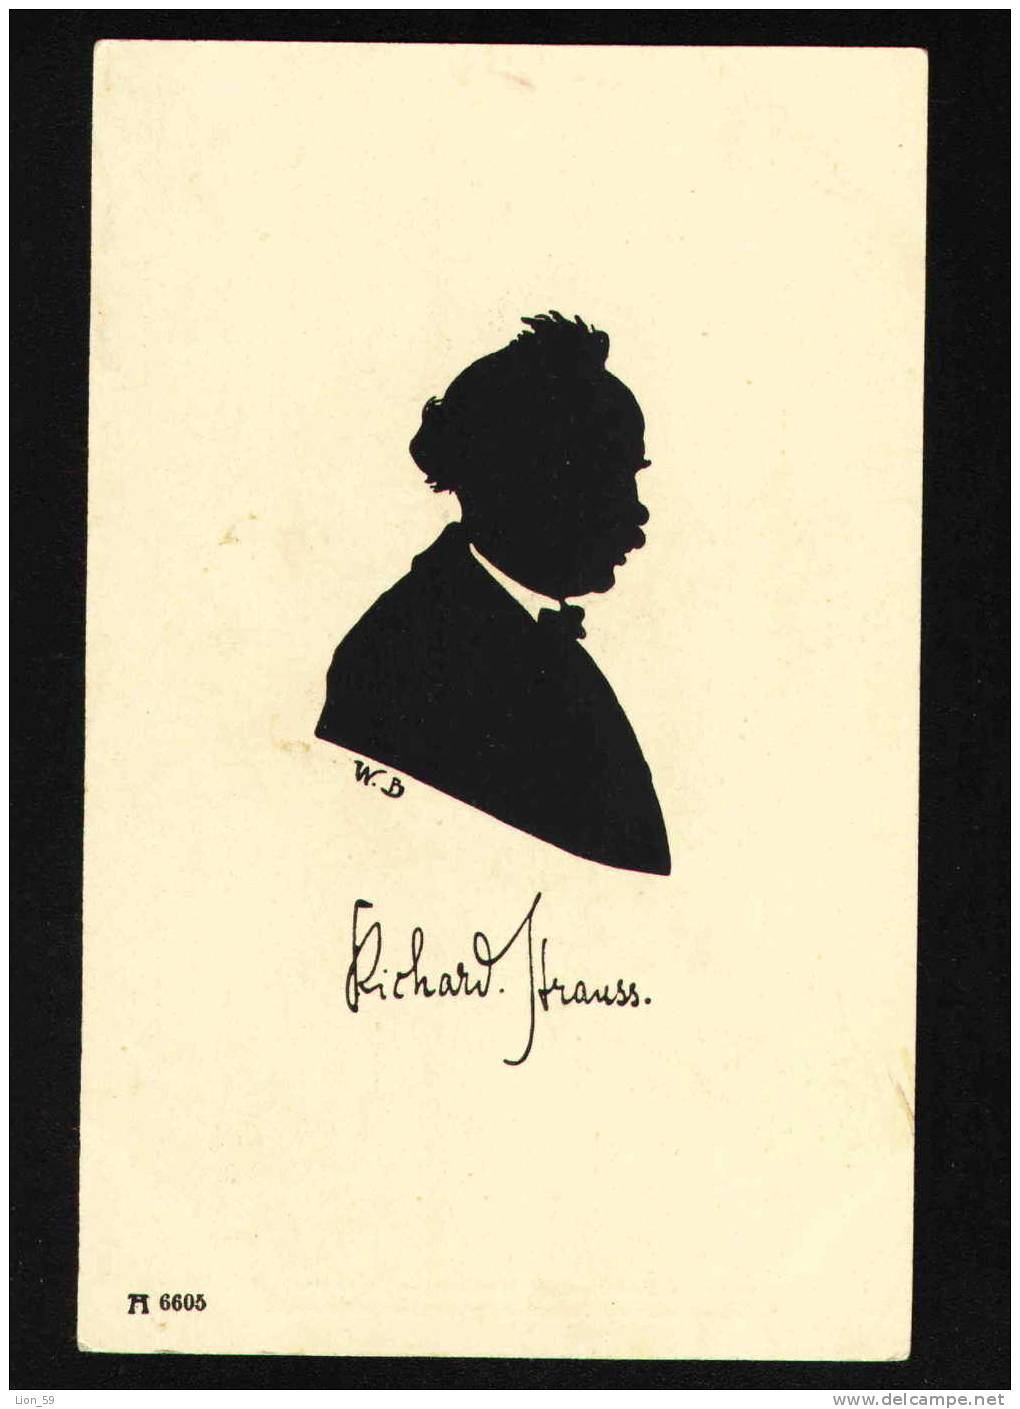 Illustrator W. BITHORN - Silhouette Richard Georg Strauss Germany COMPOSER Series - #  6605/661  Pc 19444 - Silhouettes